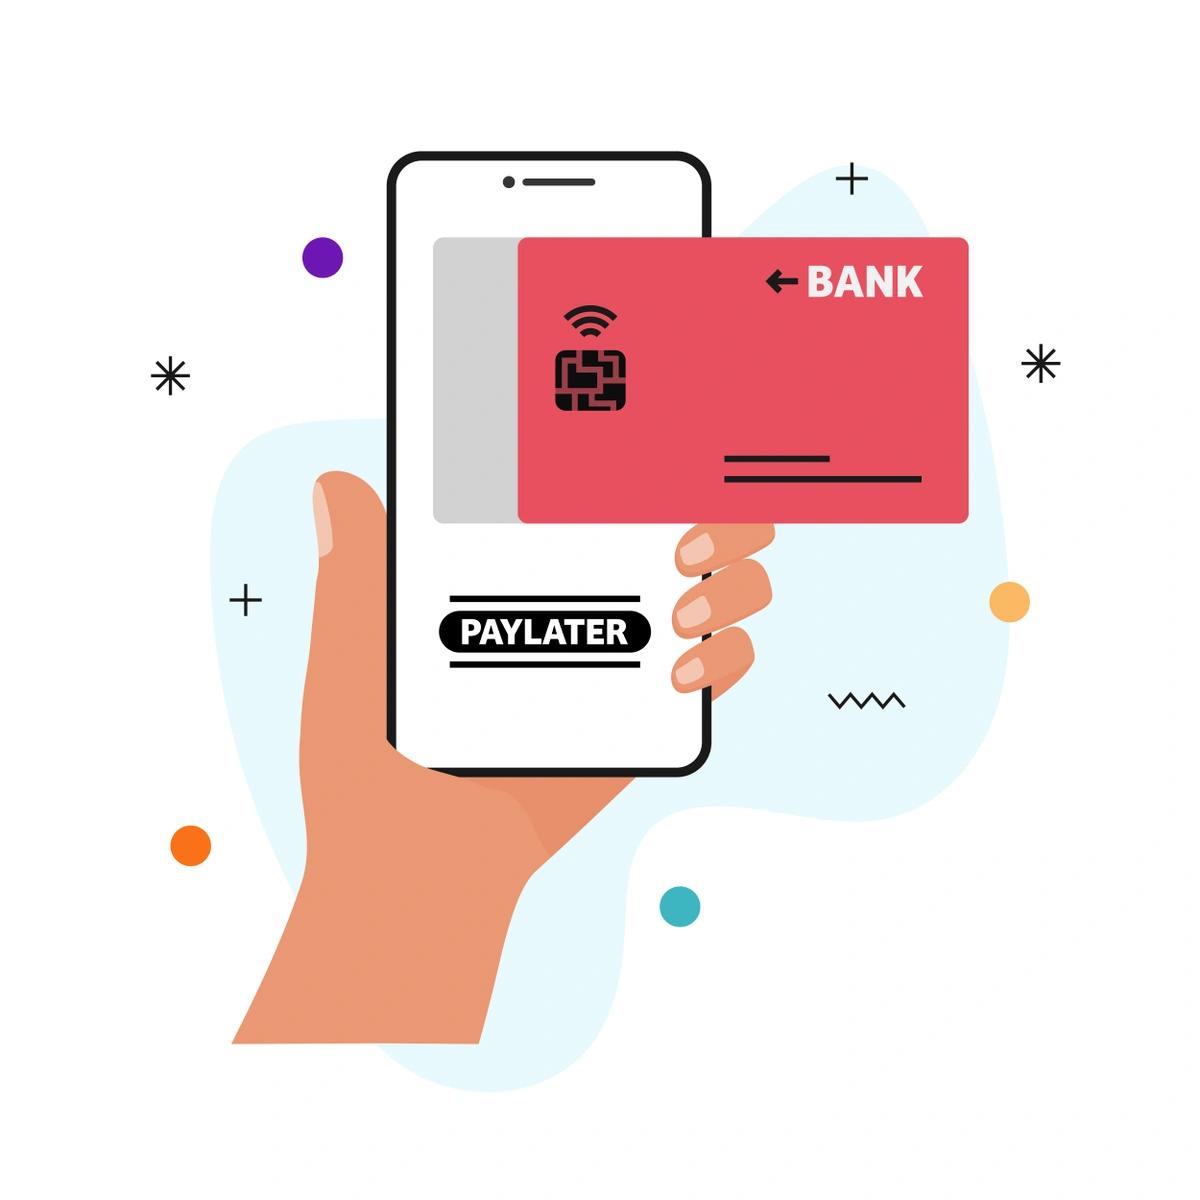 An illustration of someone using buy now, pay later on their phone. A bank card is on the screen with the text 'PAY LATER'.